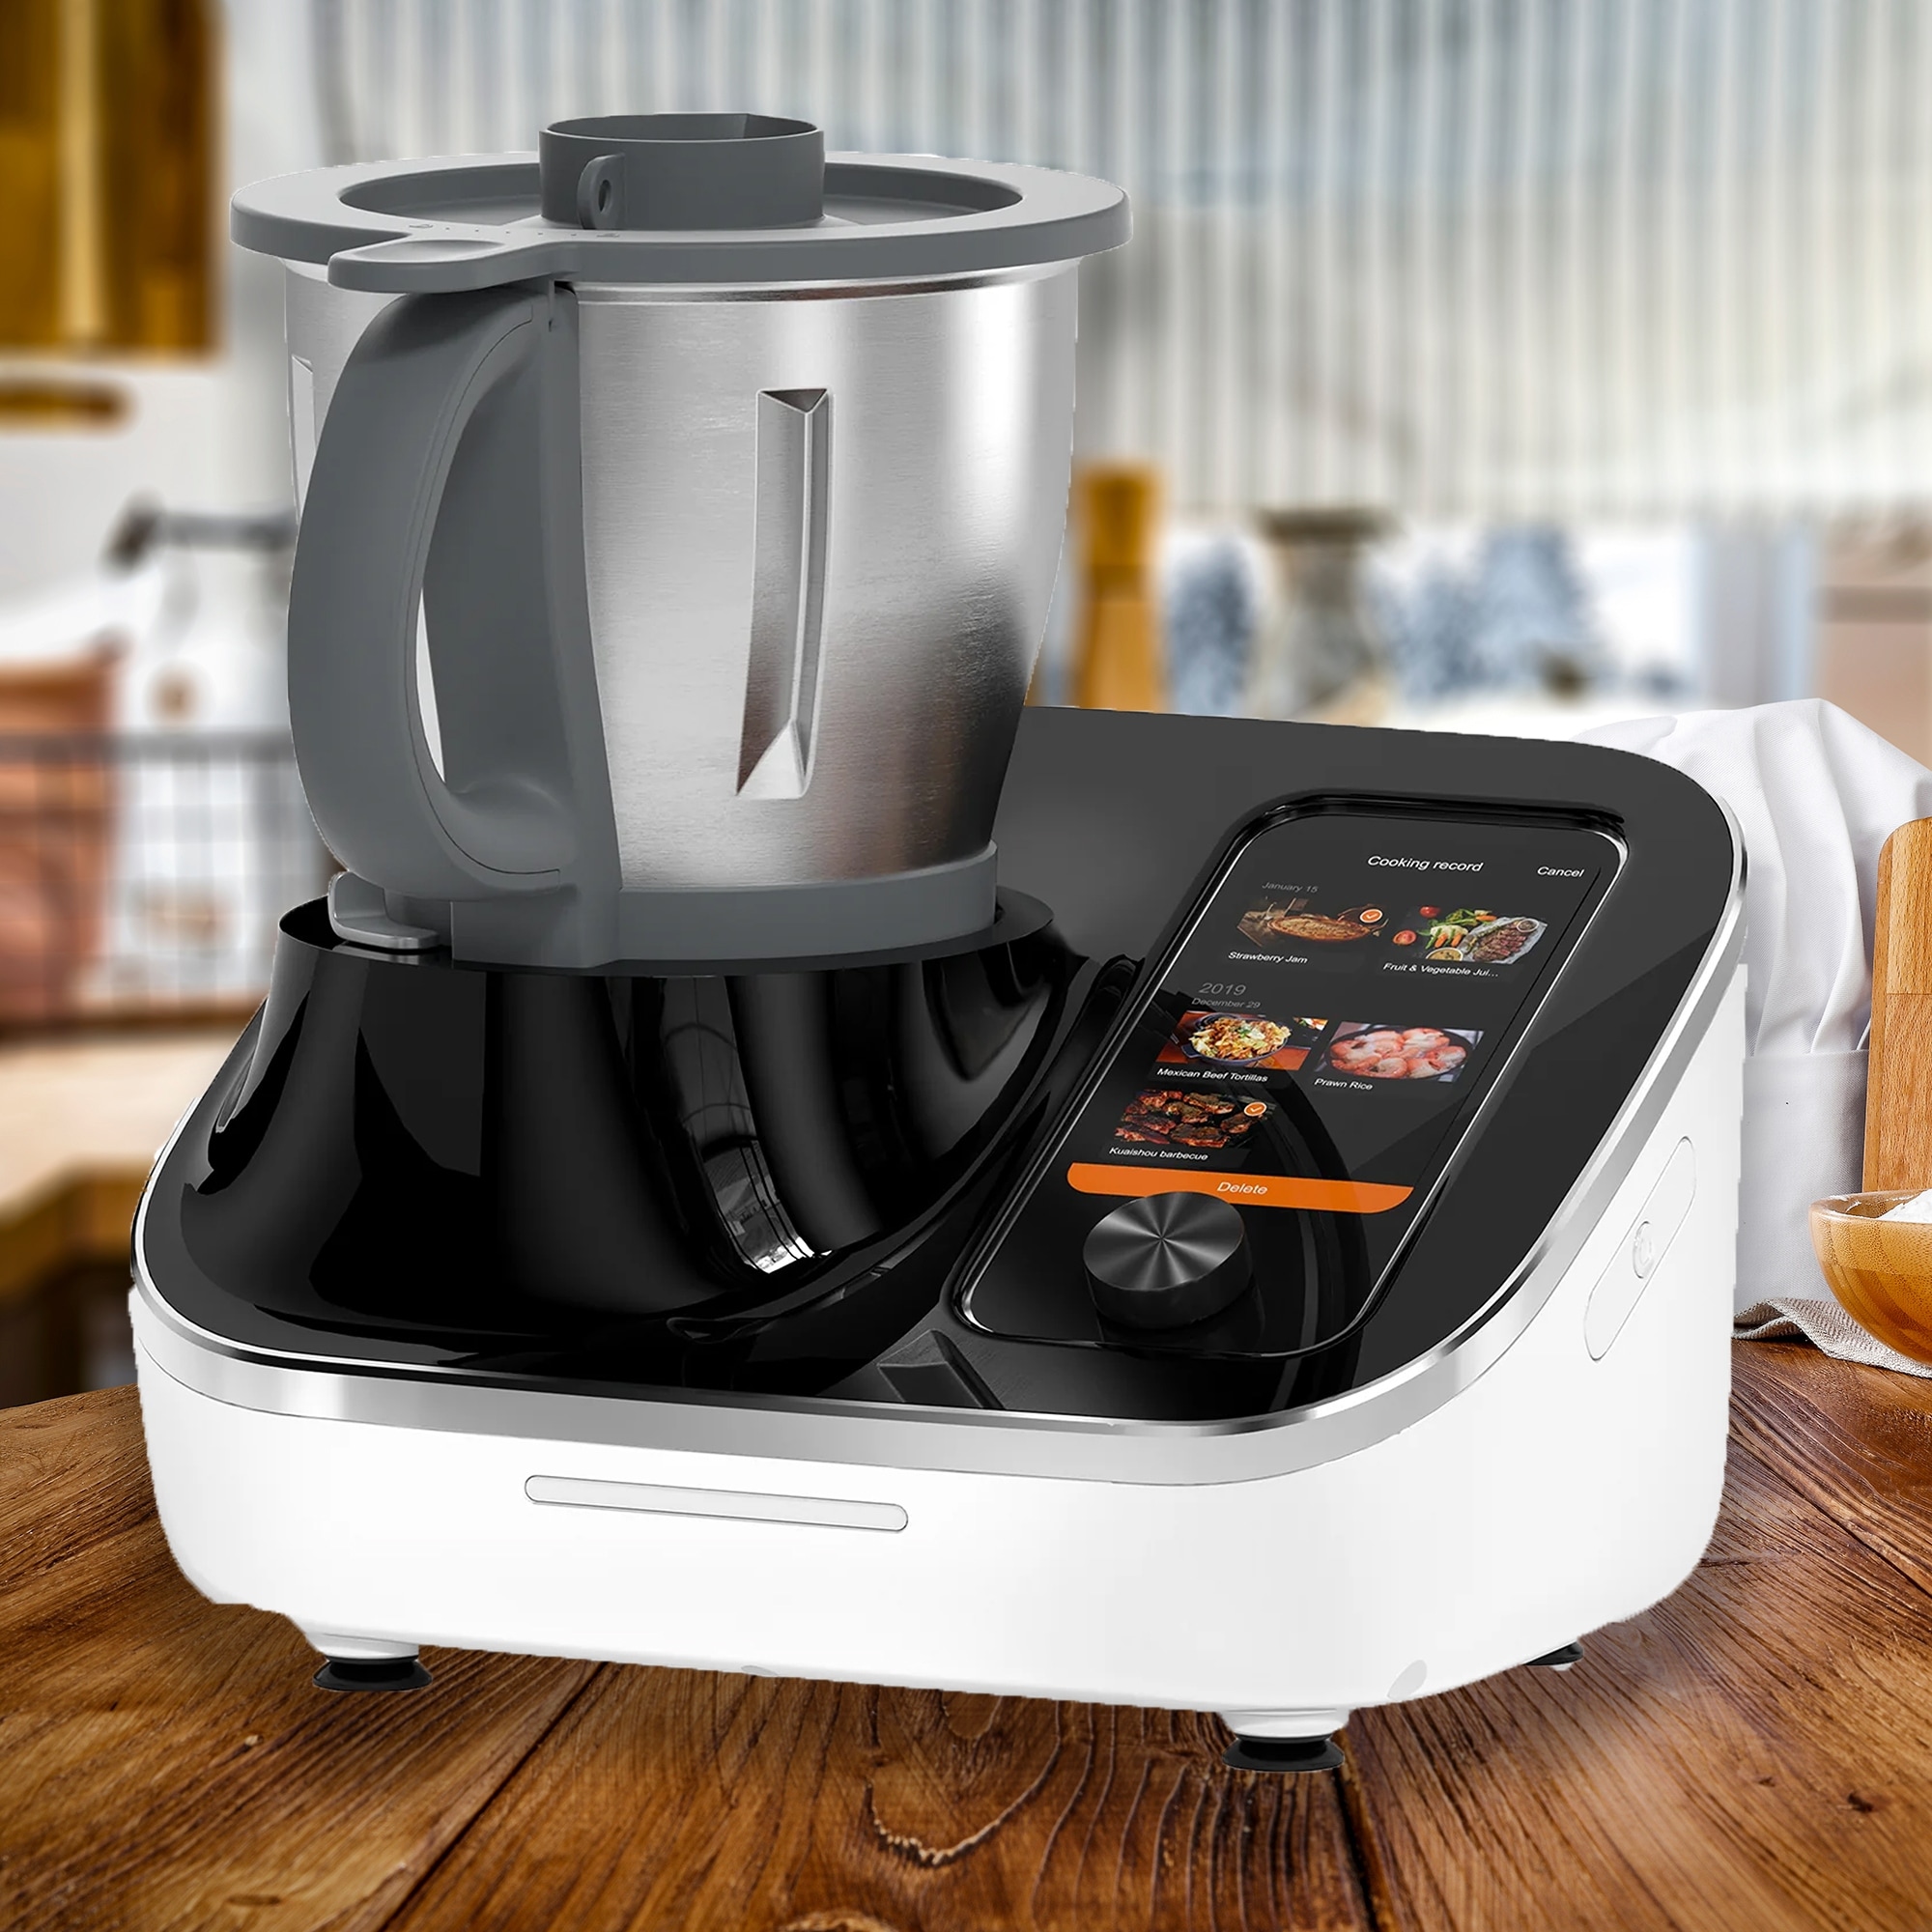 TOKIT Omni Cook Robot with 7 In Touchscreen All-in-1 Multi-Cooker with 3000+ Built-in Guided Recipes